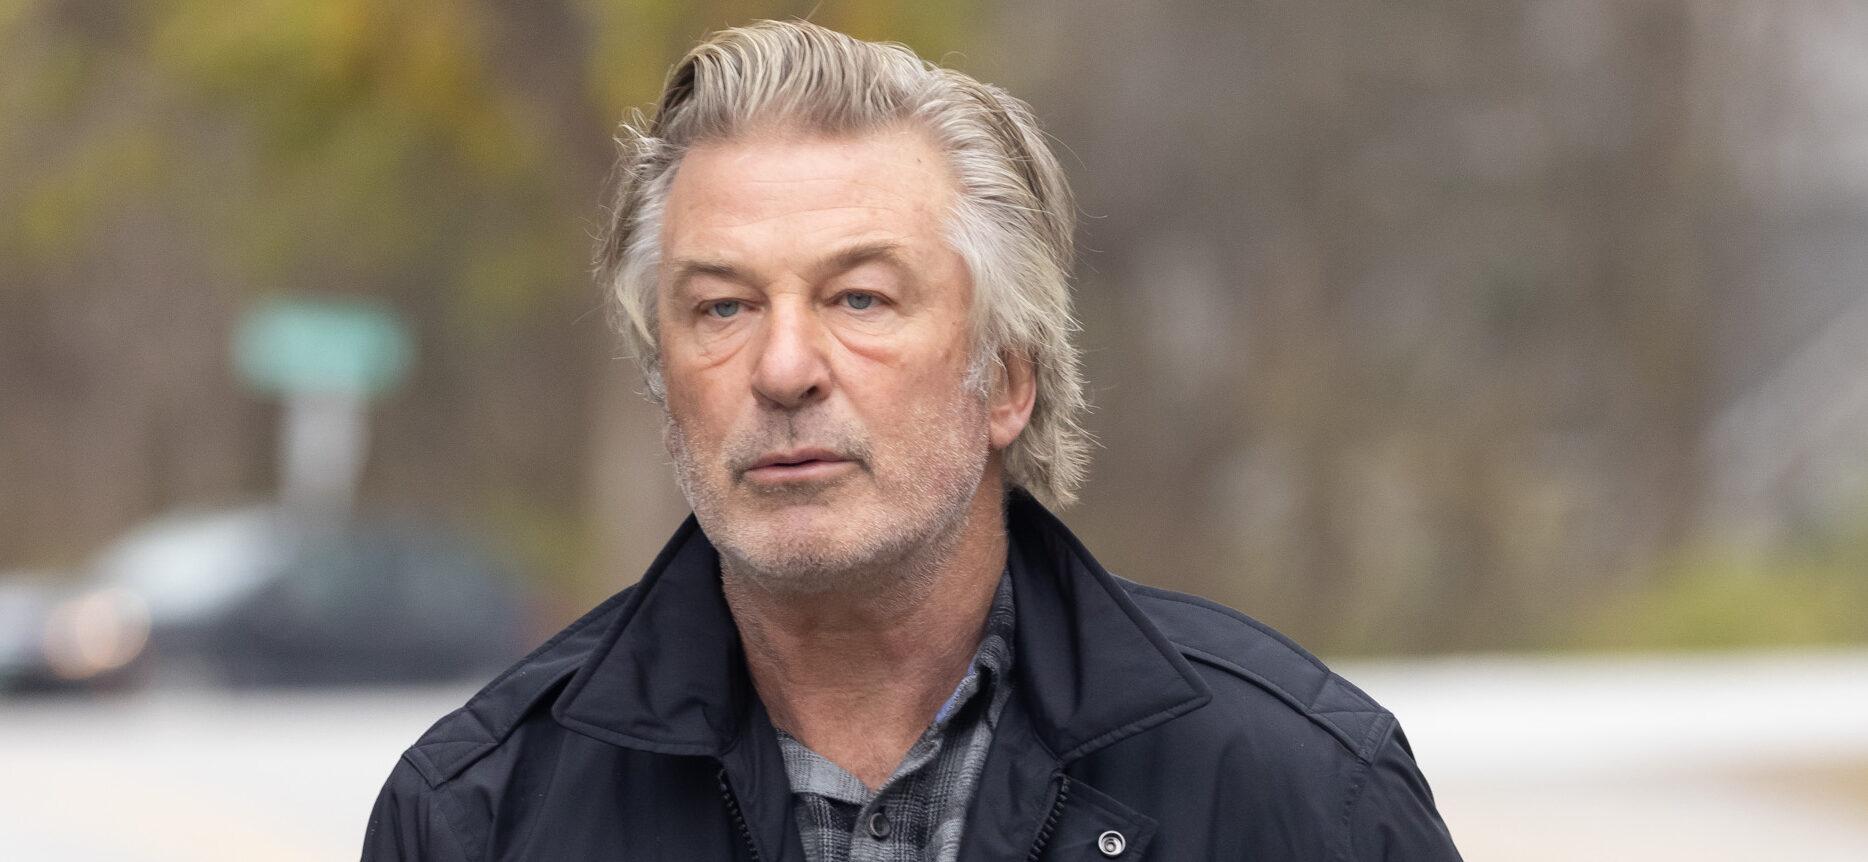 ‘Rust’ Armorer Hannah Gutierrez-Reed ‘Can’t Believe’ Alec Baldwin Was Involved In Fatal Shooting